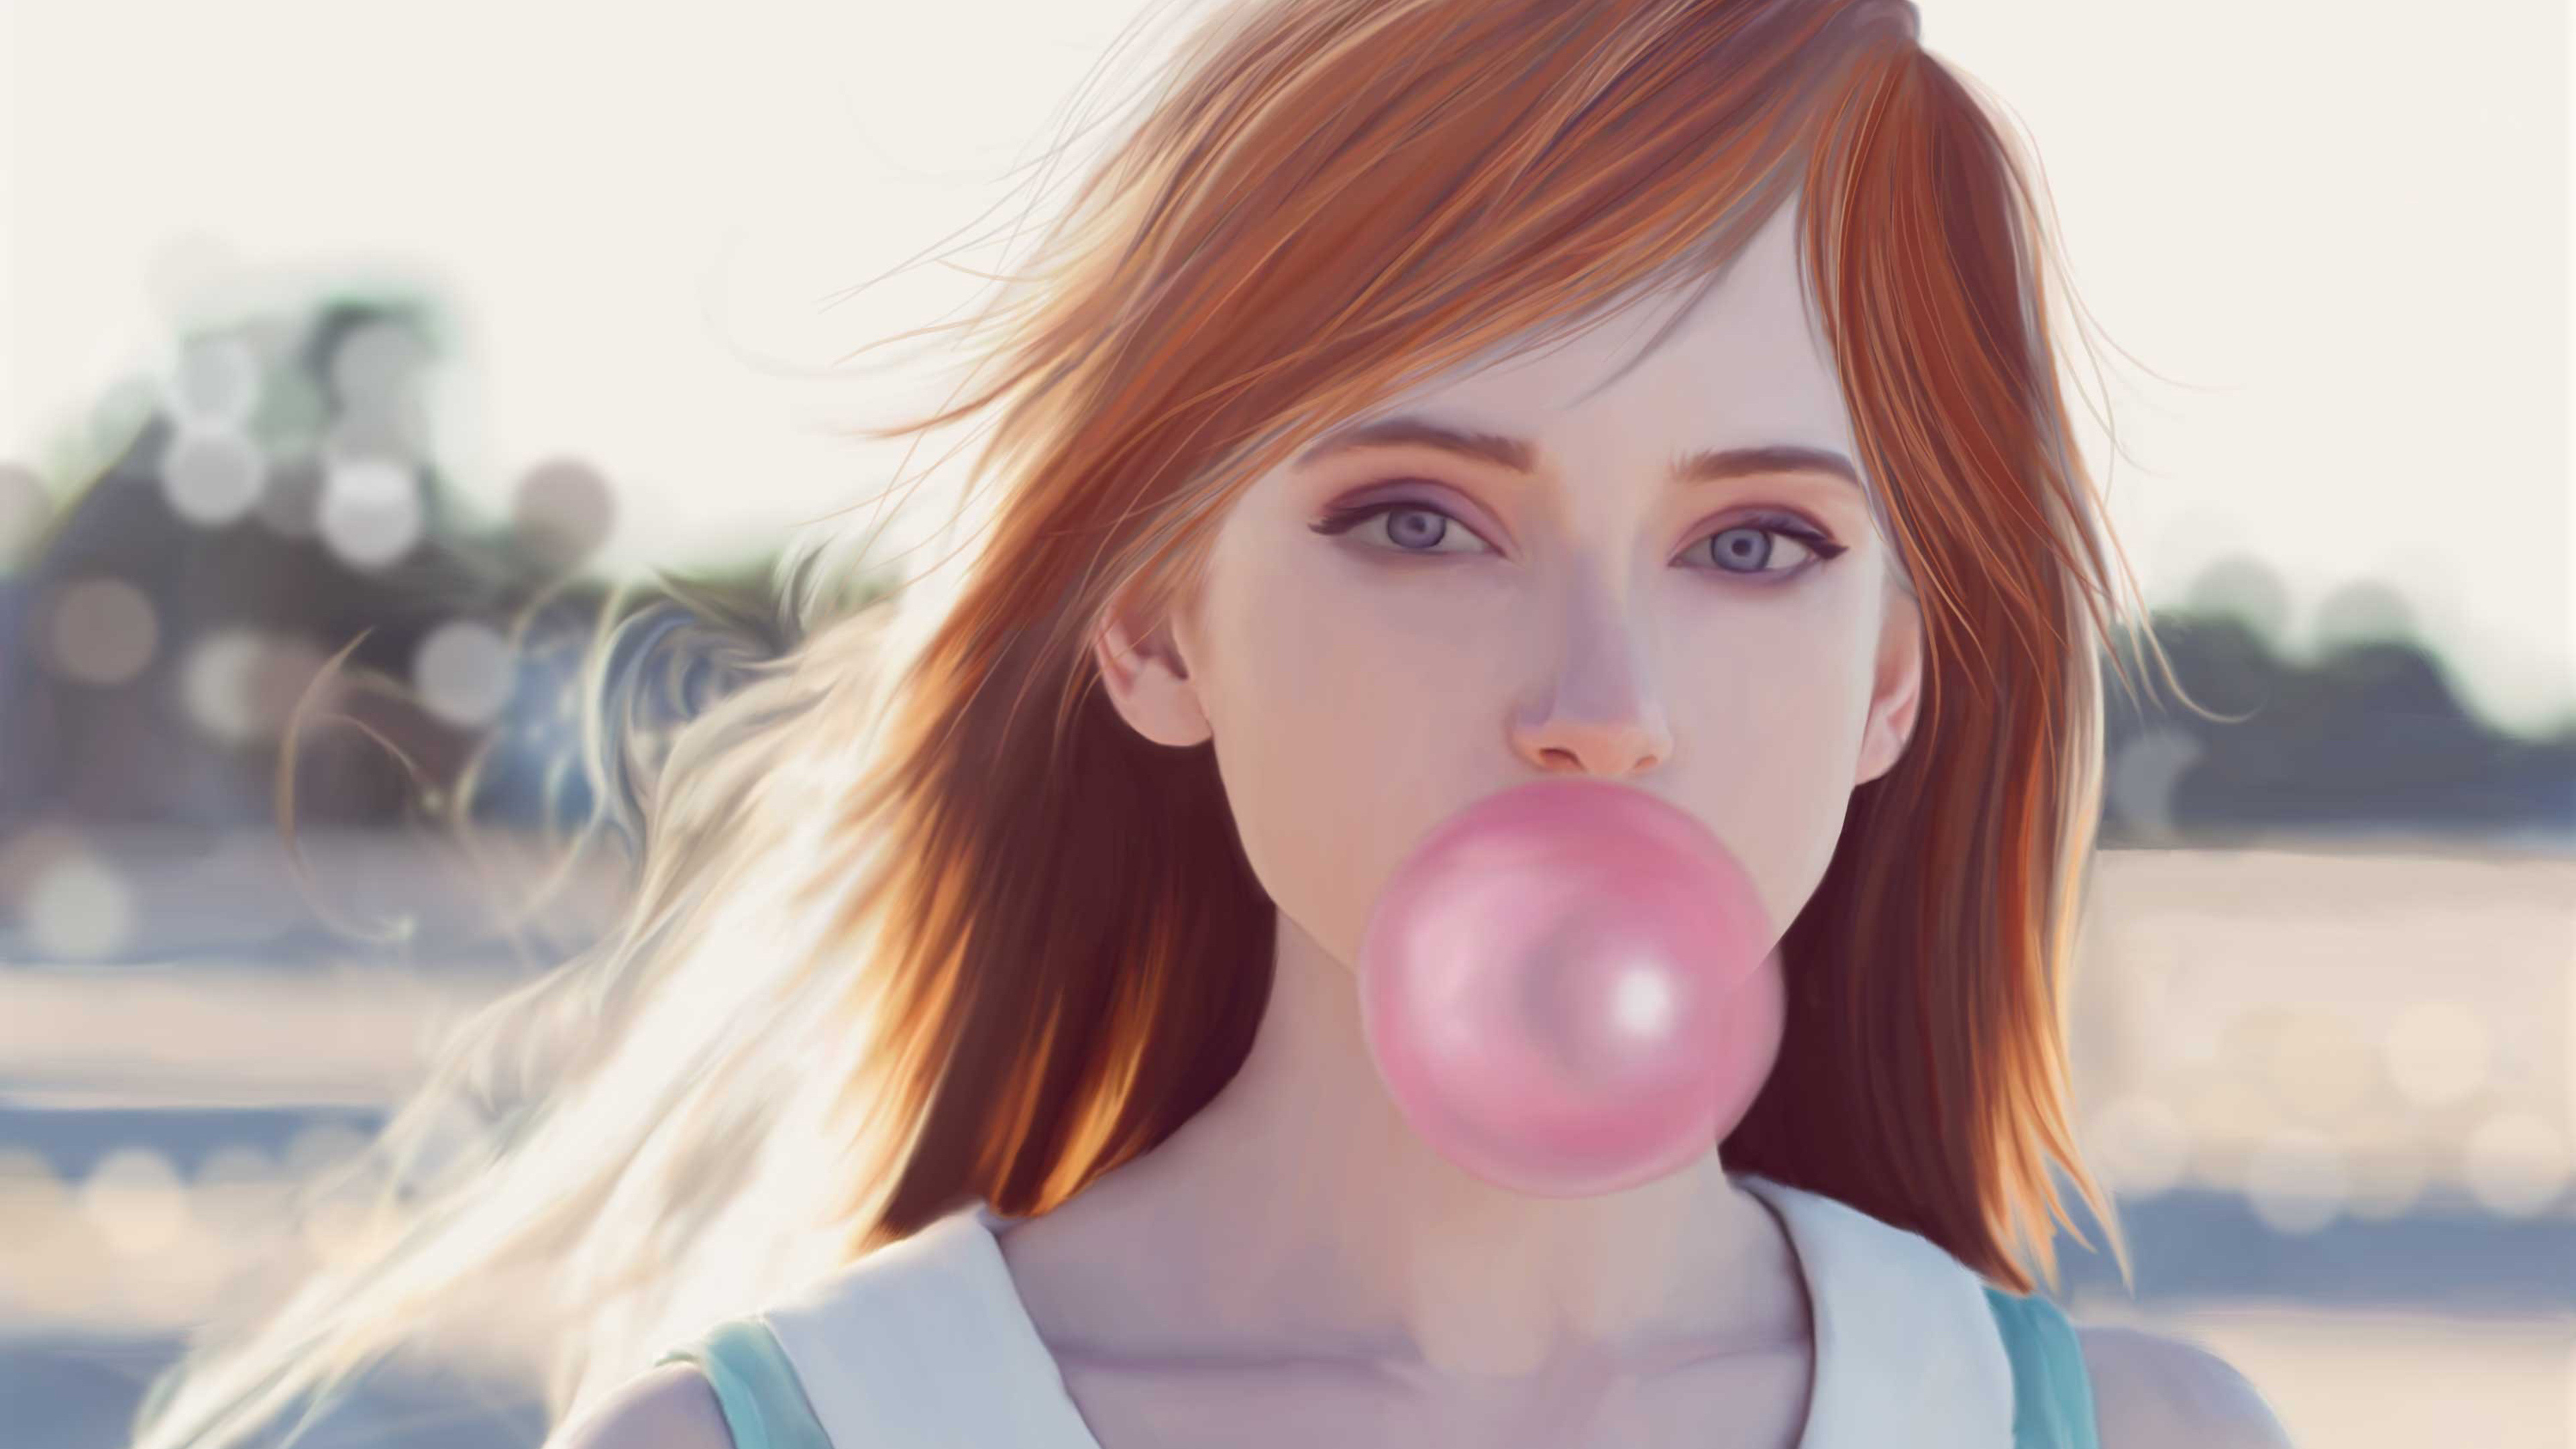 Girl blowing bubble gum, Playful and carefree, Bubble-blowing joy, Photo-worthy moment, 3840x2160 4K Desktop